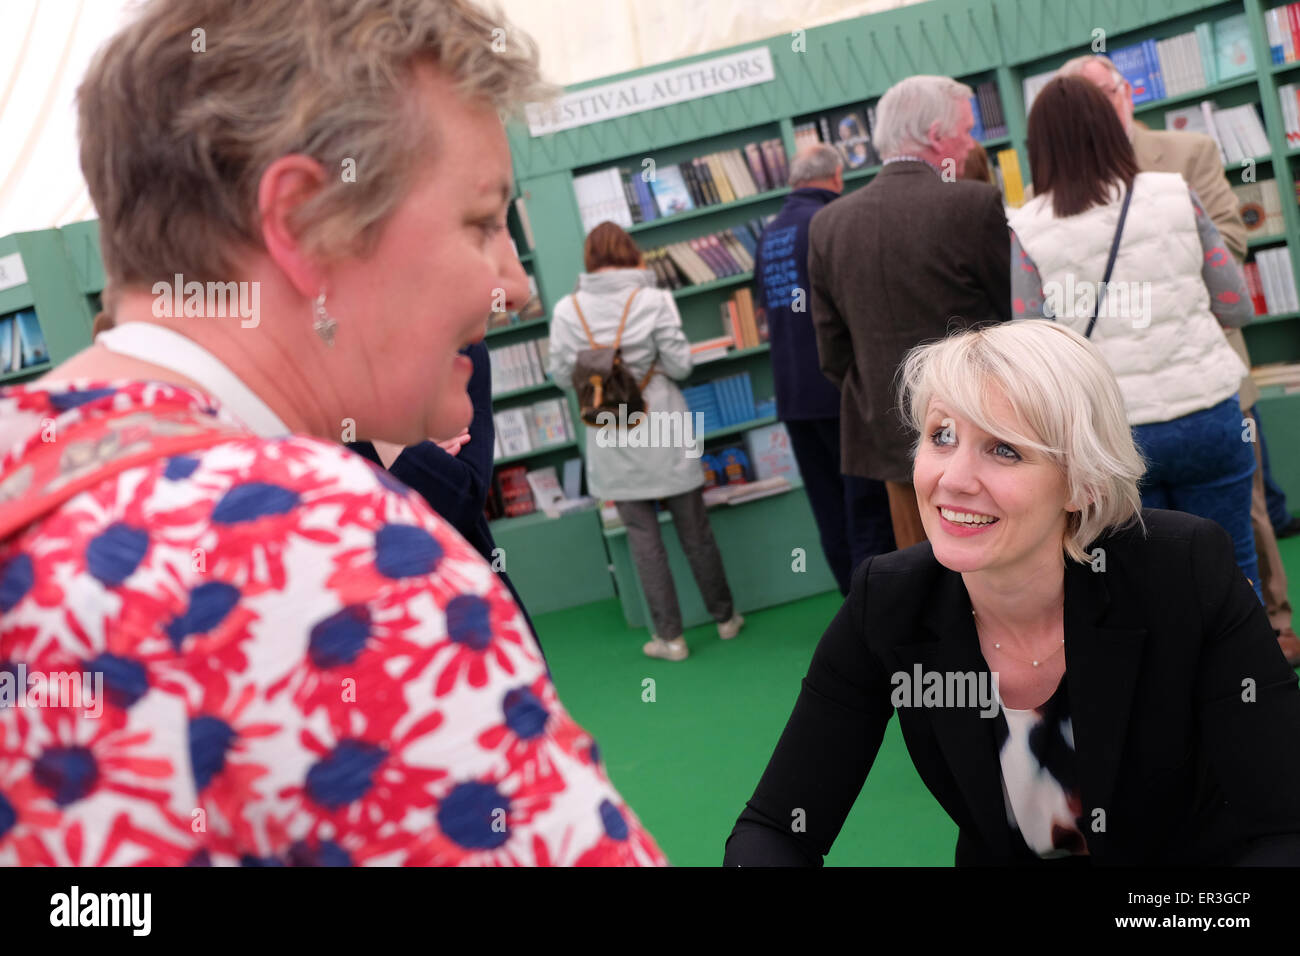 Hay Festival, Powys, Wales - May 2015  - Author Tessa Dunlop signs copies of her latest book The Bletchley Girls - War, Secrecy, Love and Loss. Stock Photo